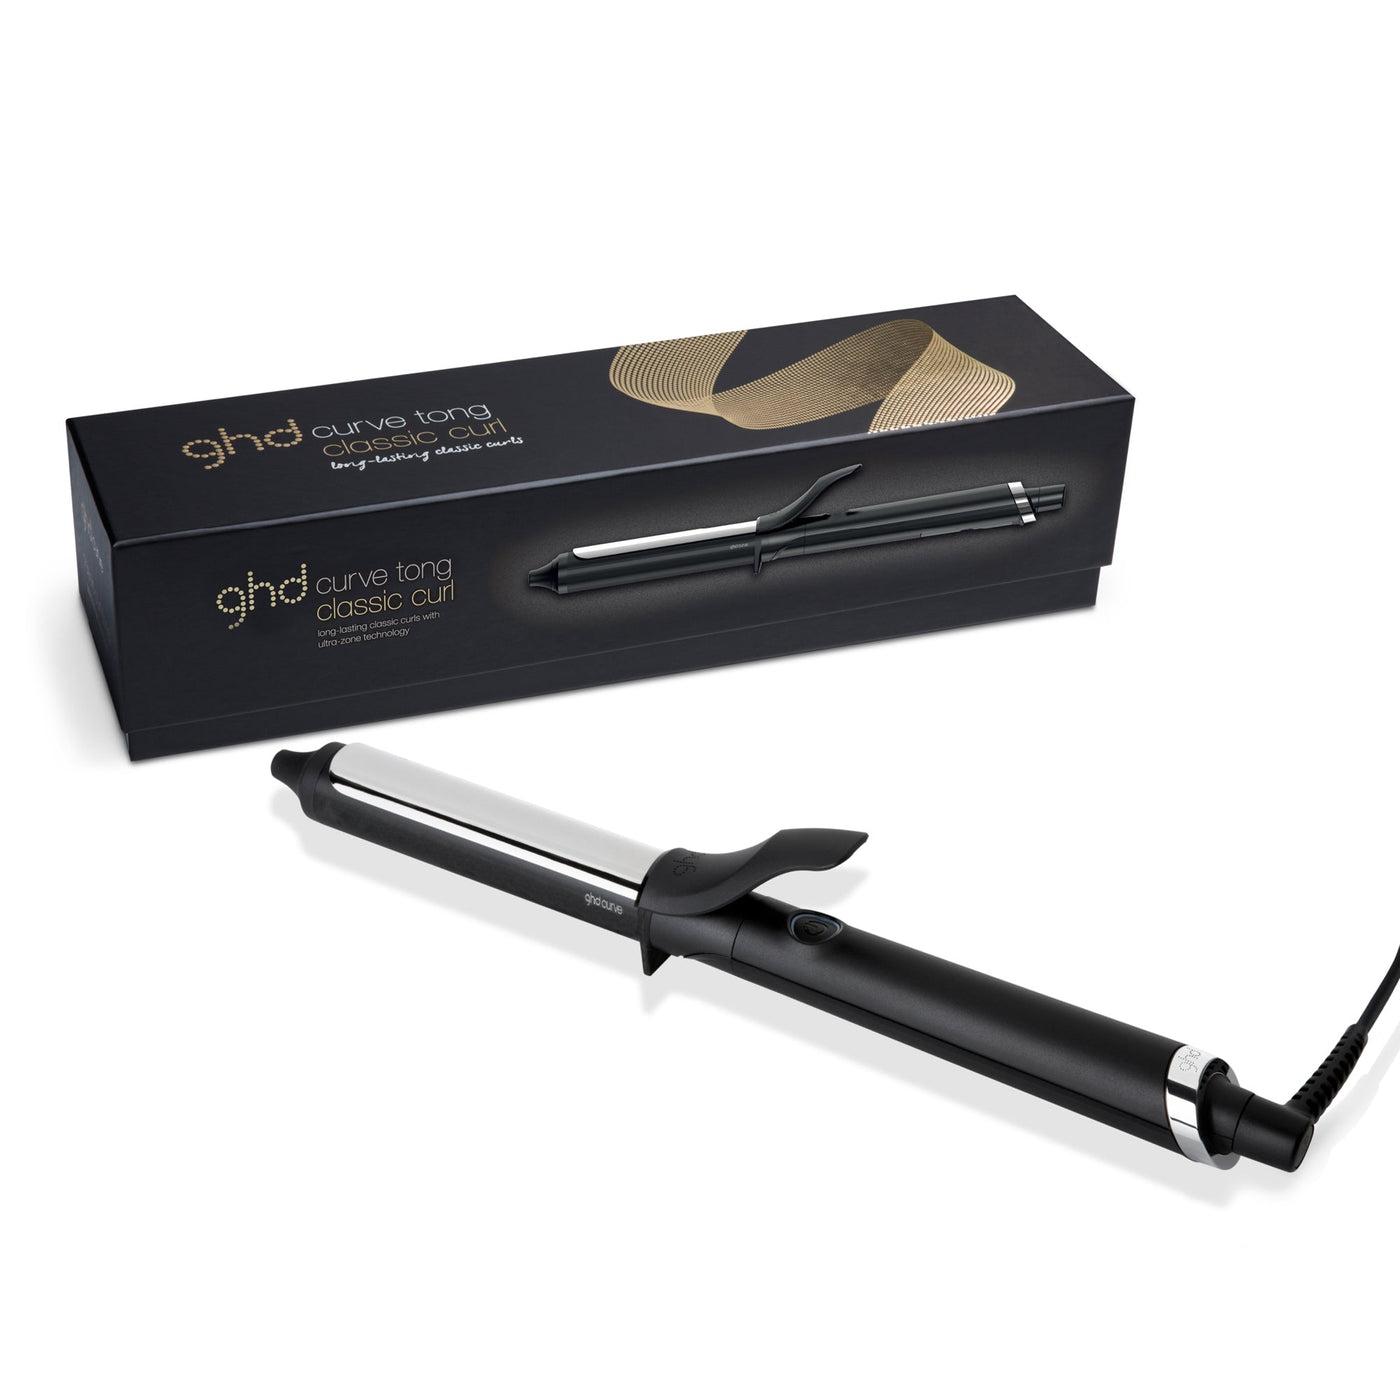 ghd Curve® Soft Curl Tong (32mm) packaging